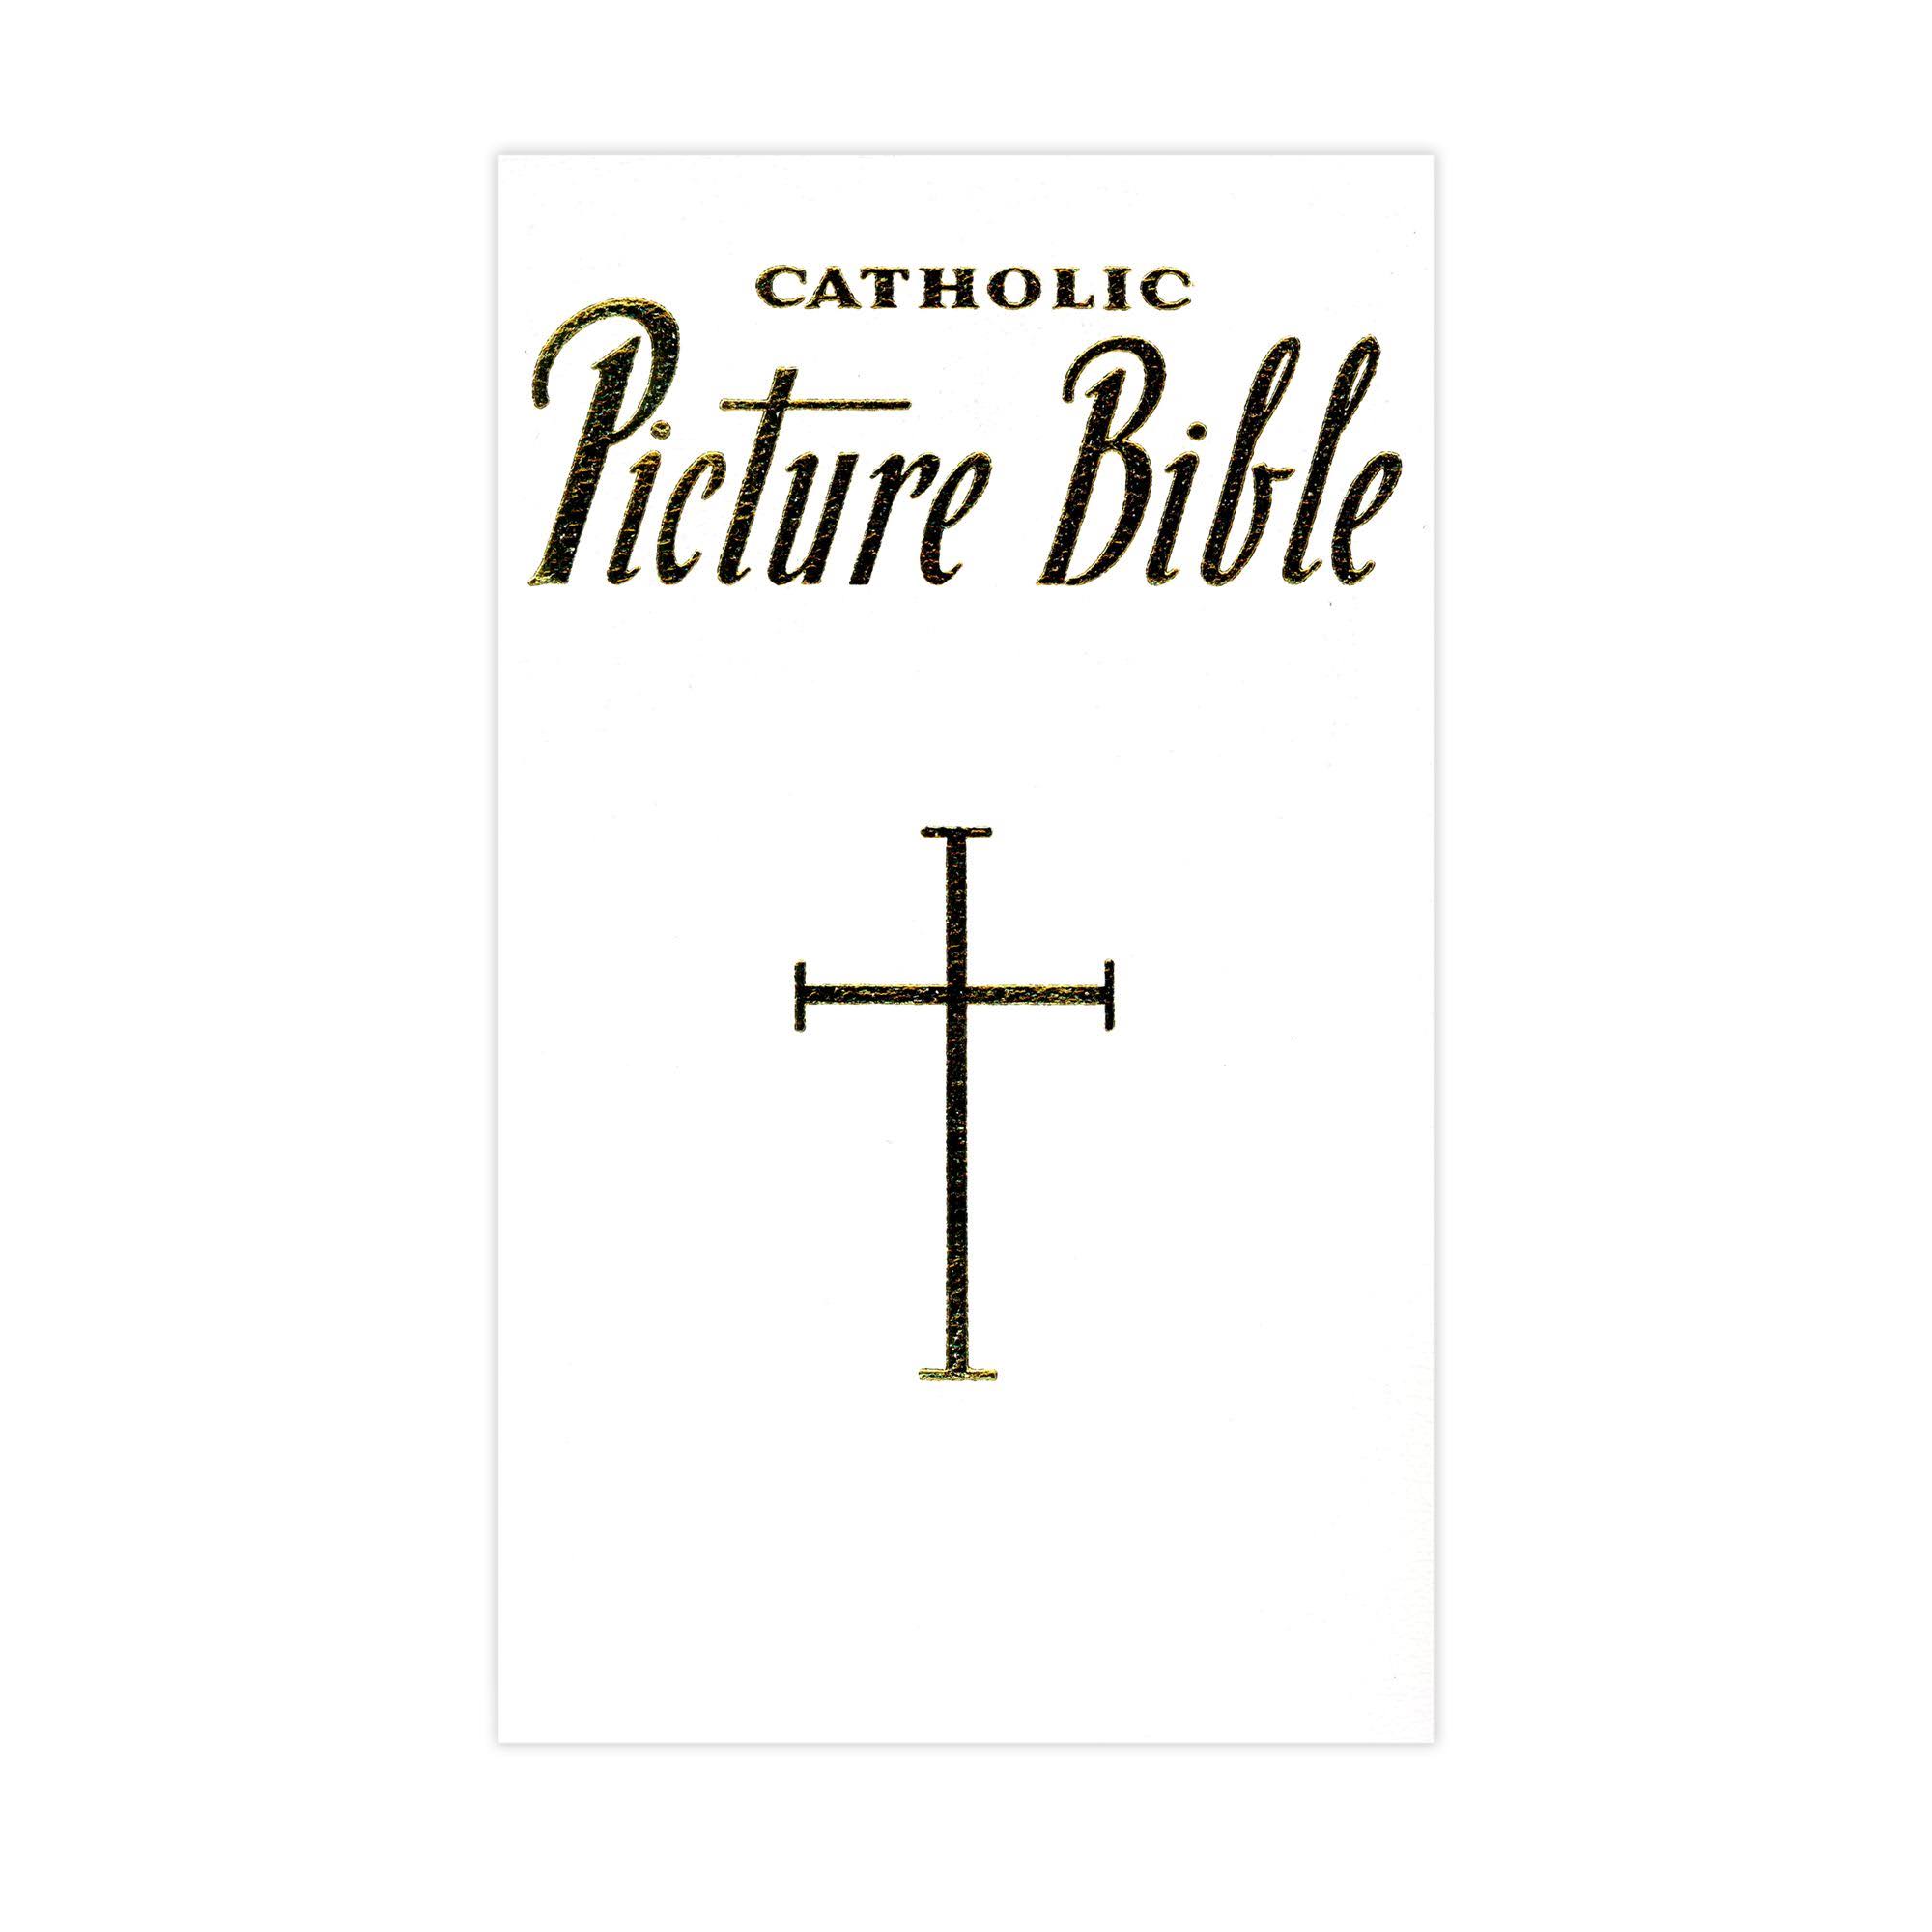 New Catholic Picture Bible: Popular Stories from the Old and New Testaments - Lawrence Lovasik